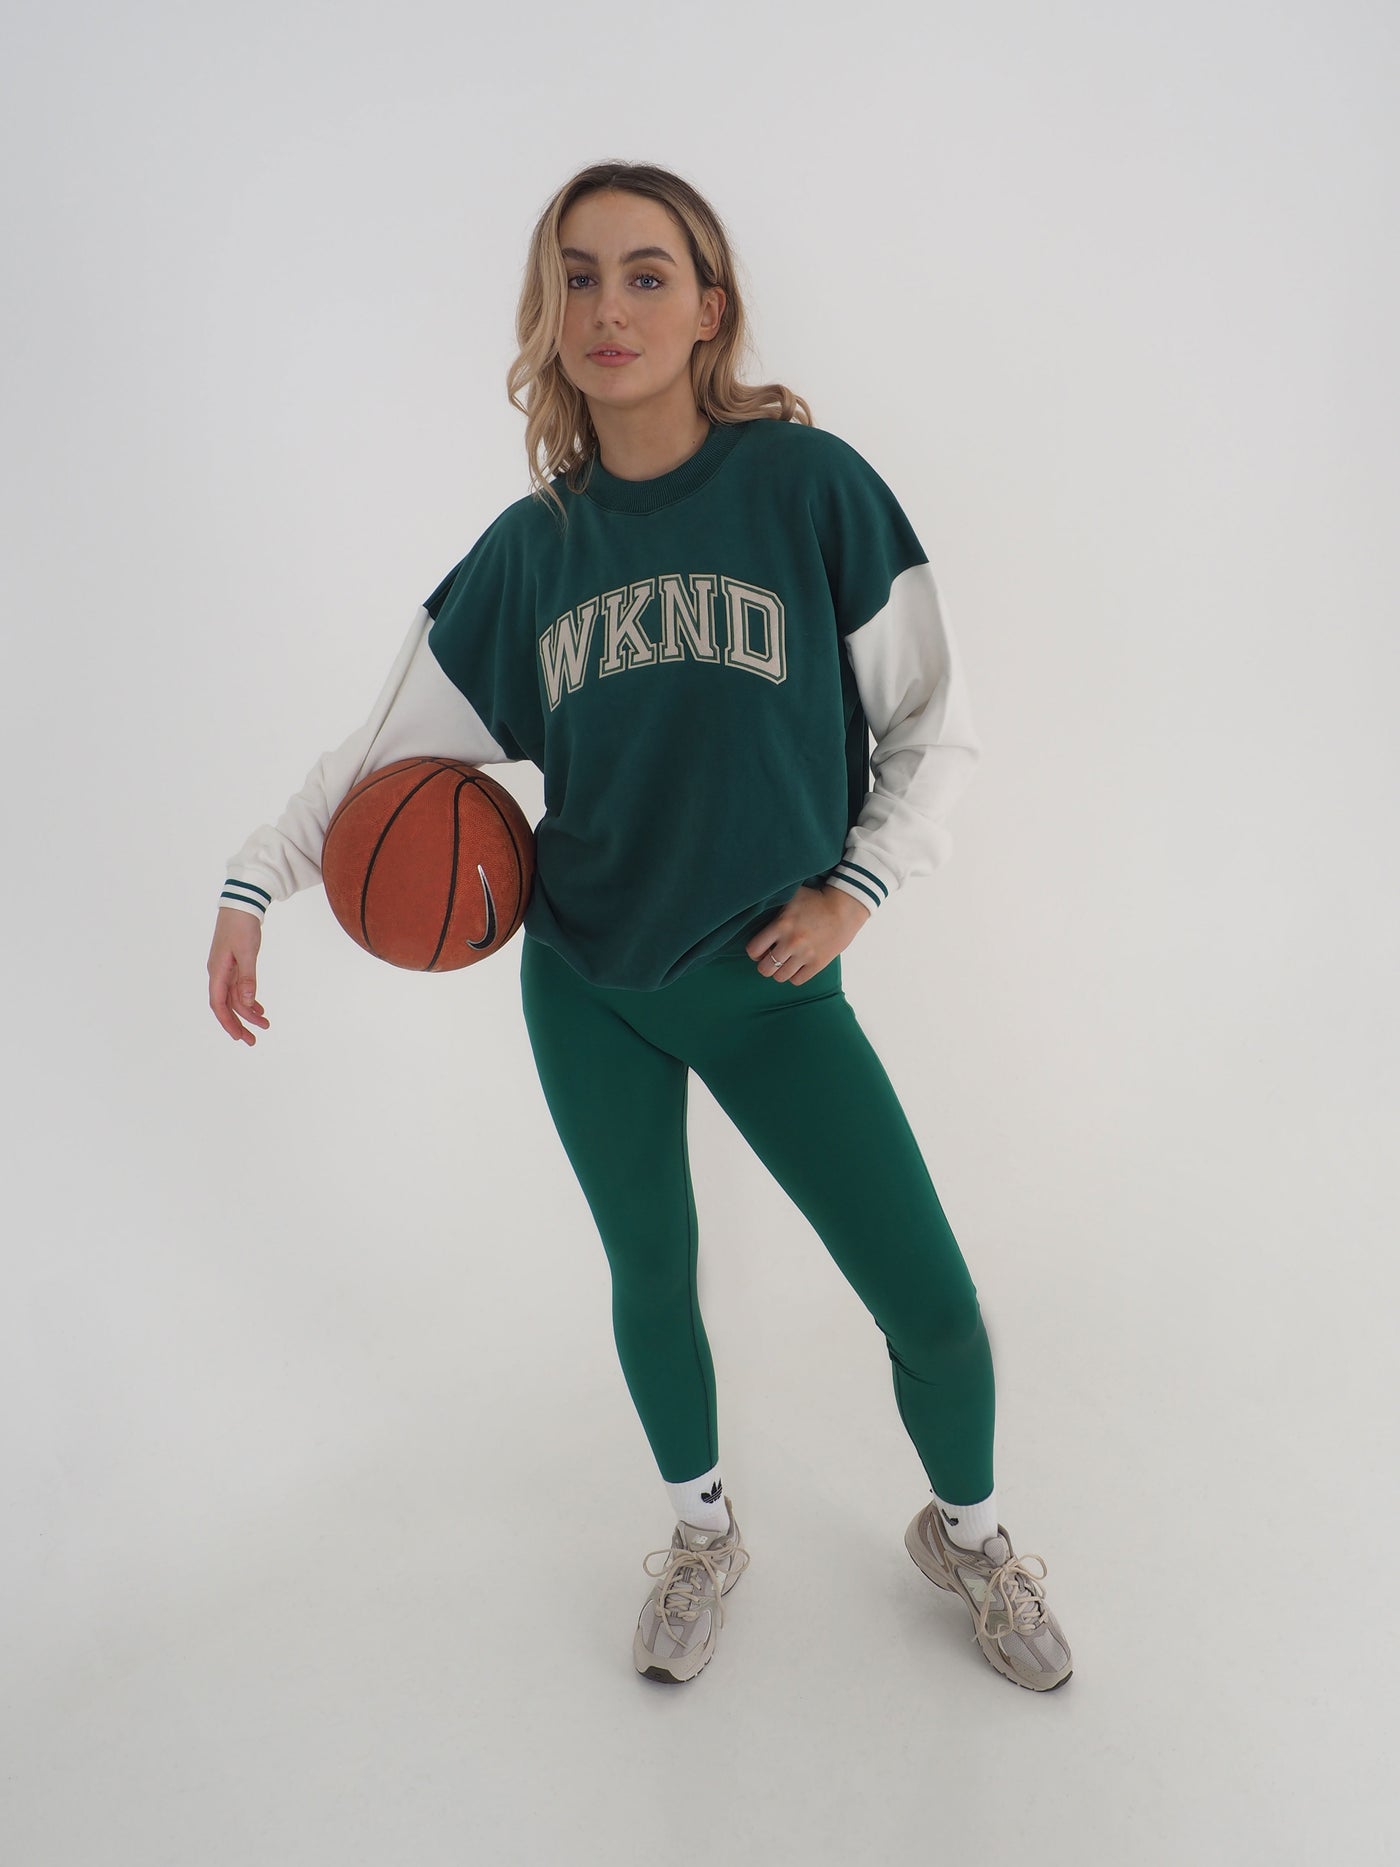 Blonde model is posing with basketball. She is wearing a college varsity style sweatshirt and matching leggings. The text spells WKND. 